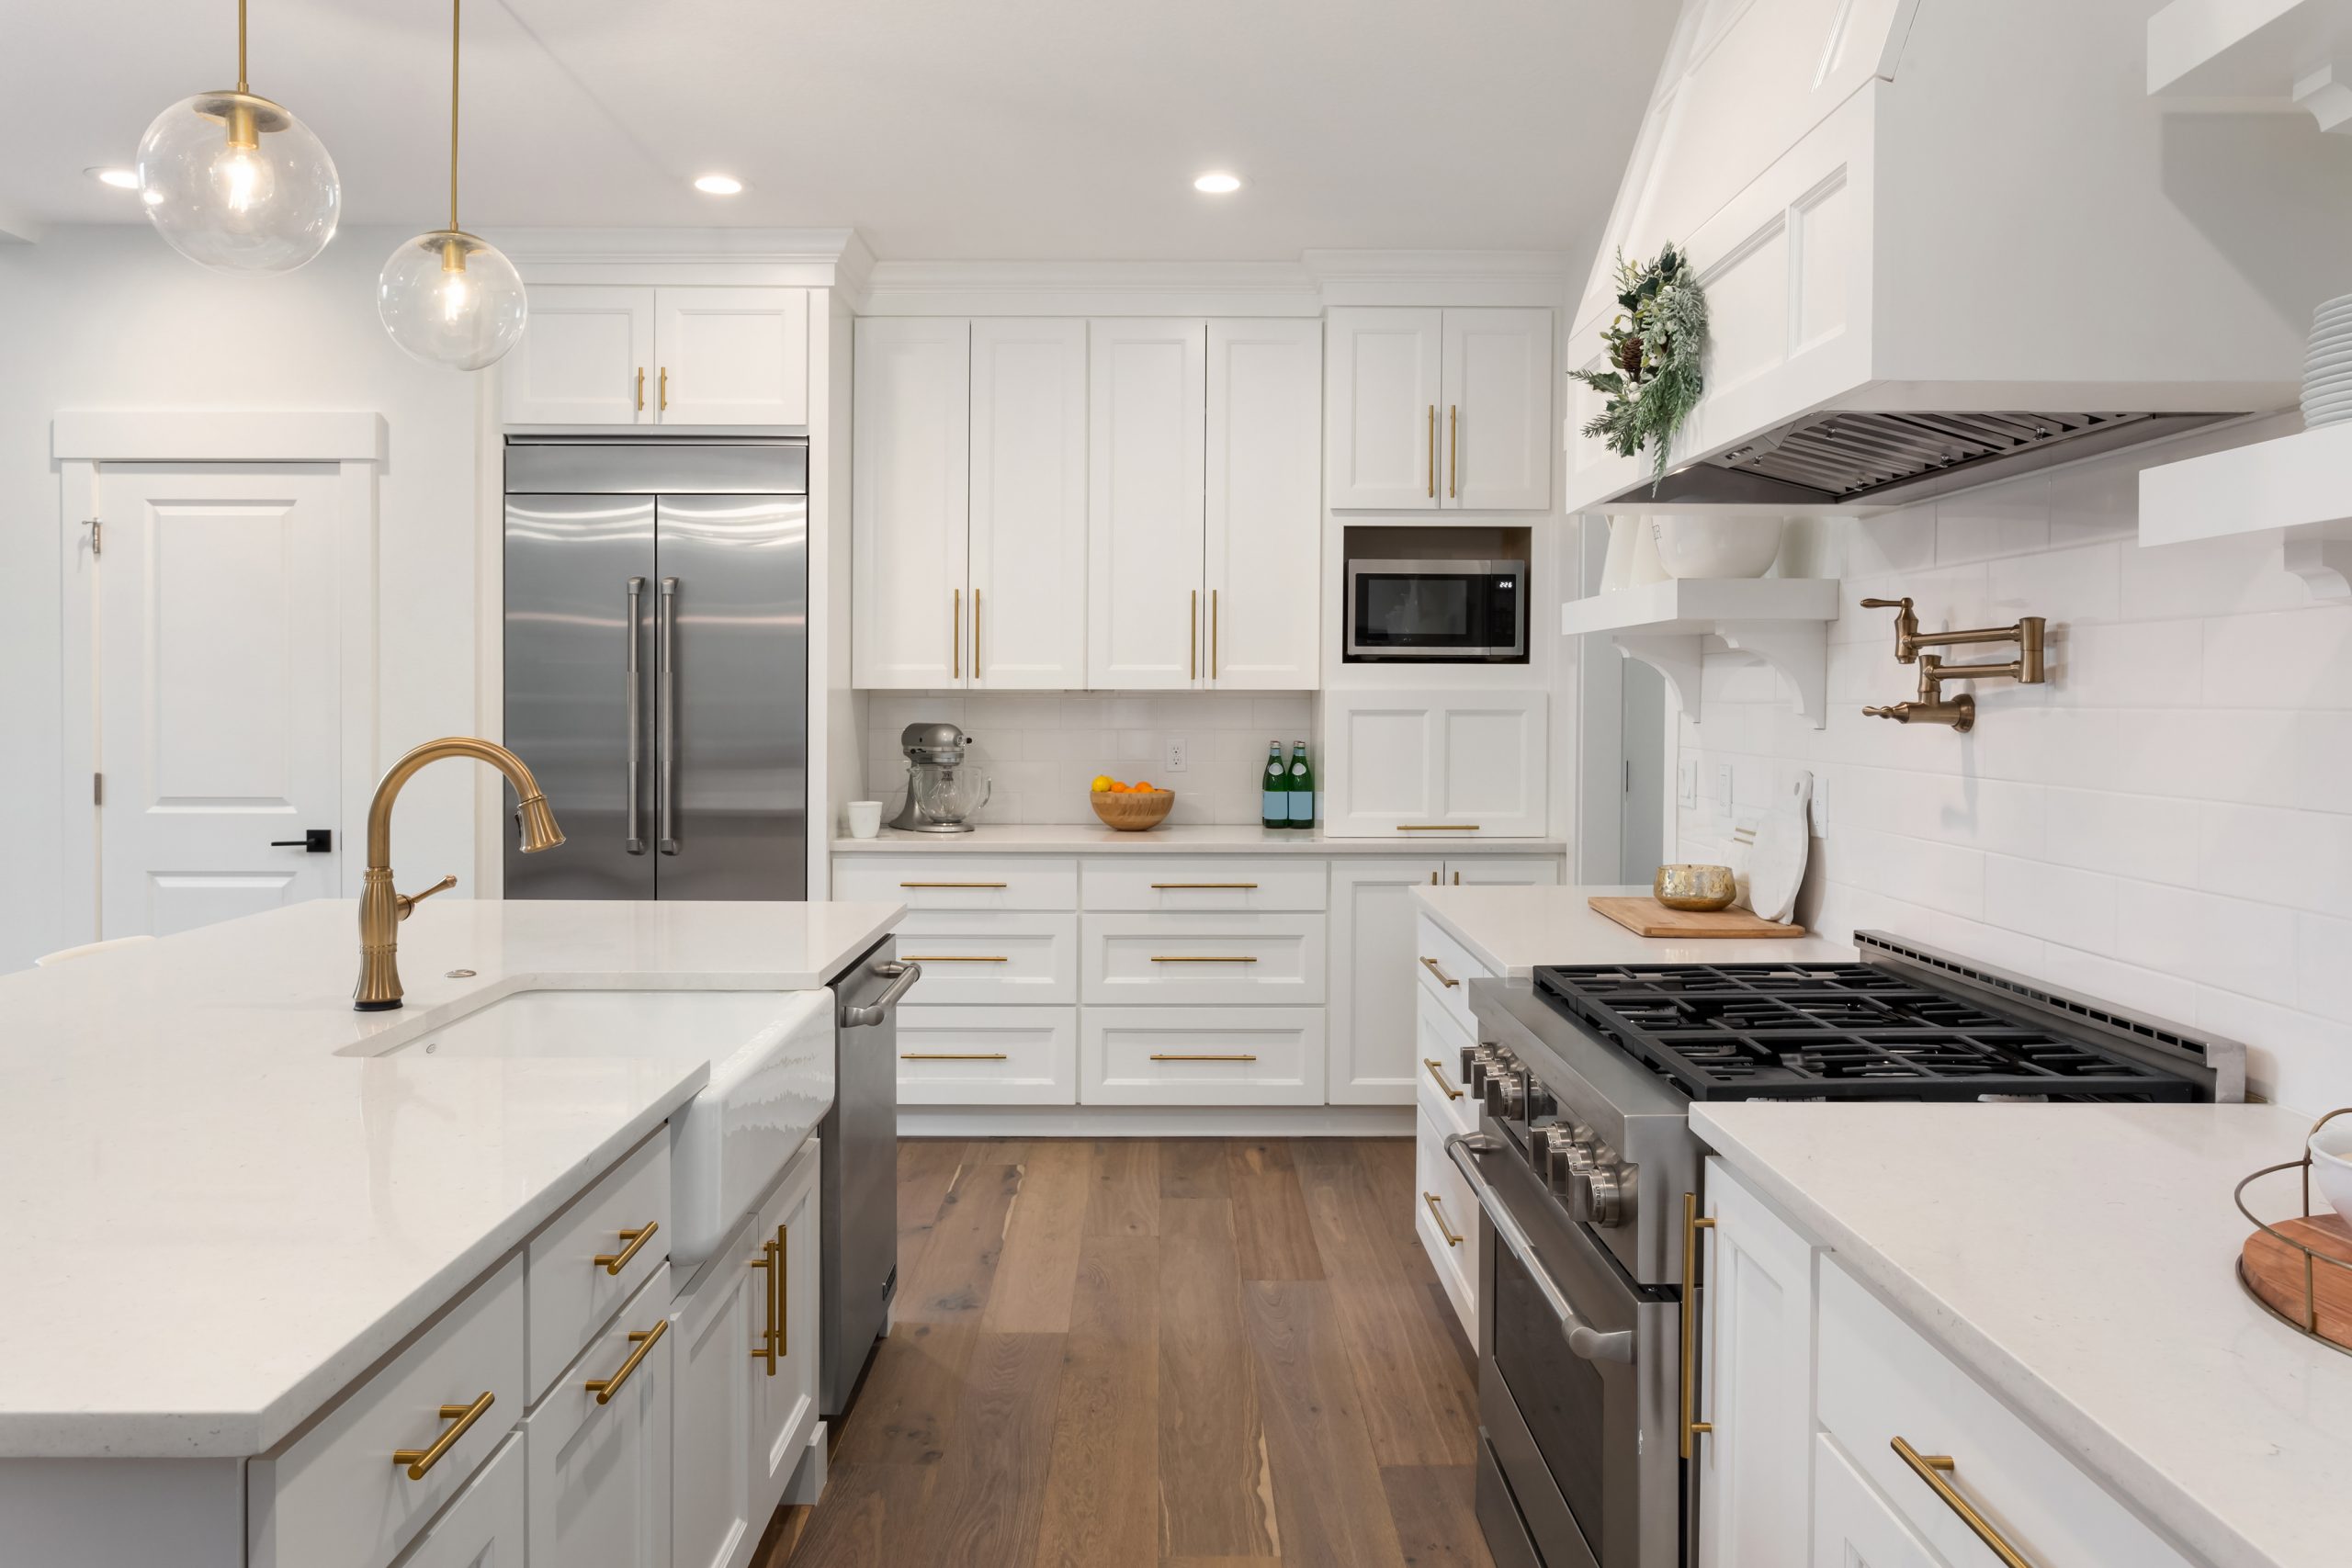 How to Choose the Perfect Kitchen Layout for Your Home